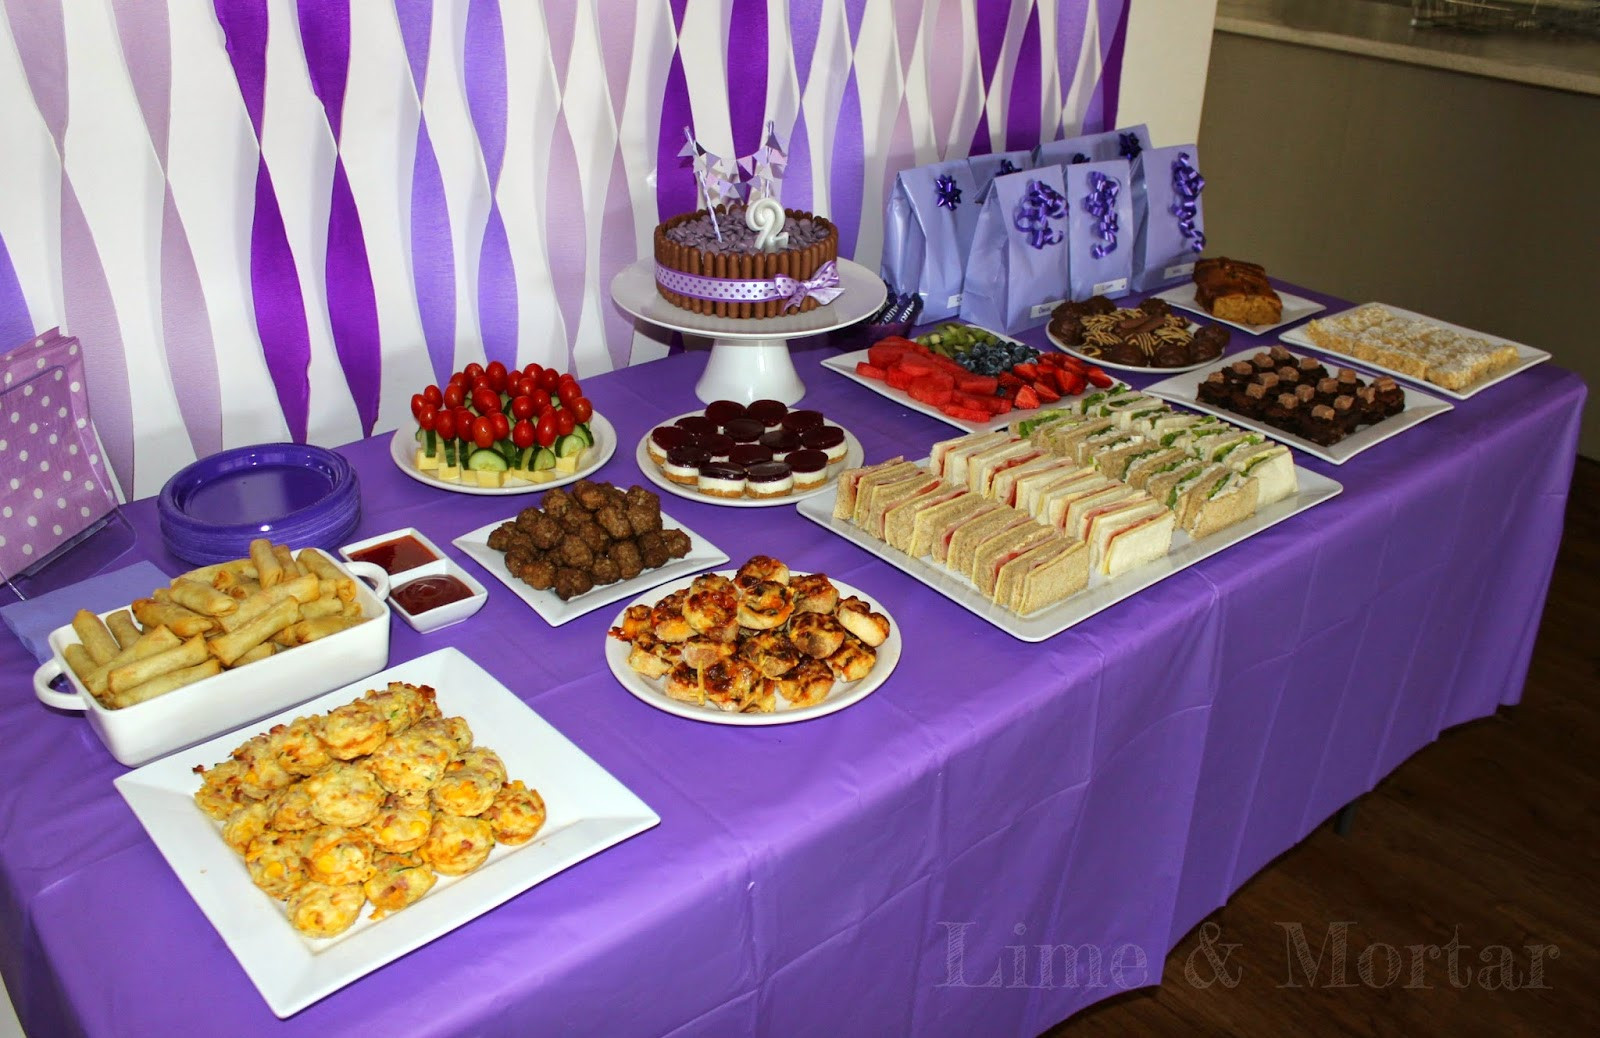 Purple Food Ideas For Party
 Lime & Mortar Kids Parties Purple Party